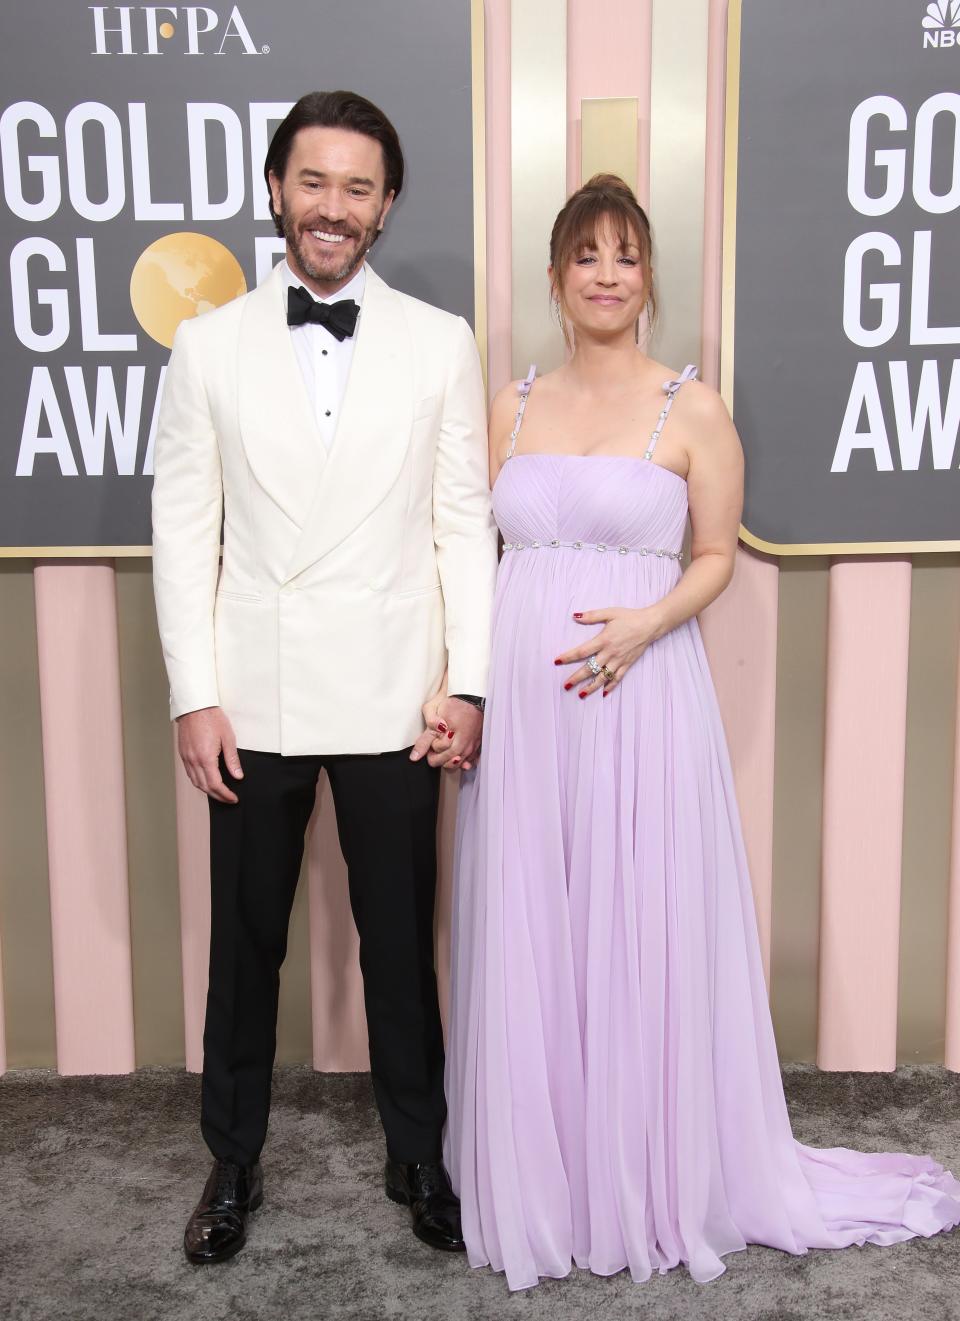 Kaley Cuoco, right, who welcomed daughter Matilda with boyfriend Tom Pelphrey, left, in April, posted an adorable video of herself greeting the newborn on Mother's Day on Instagram.